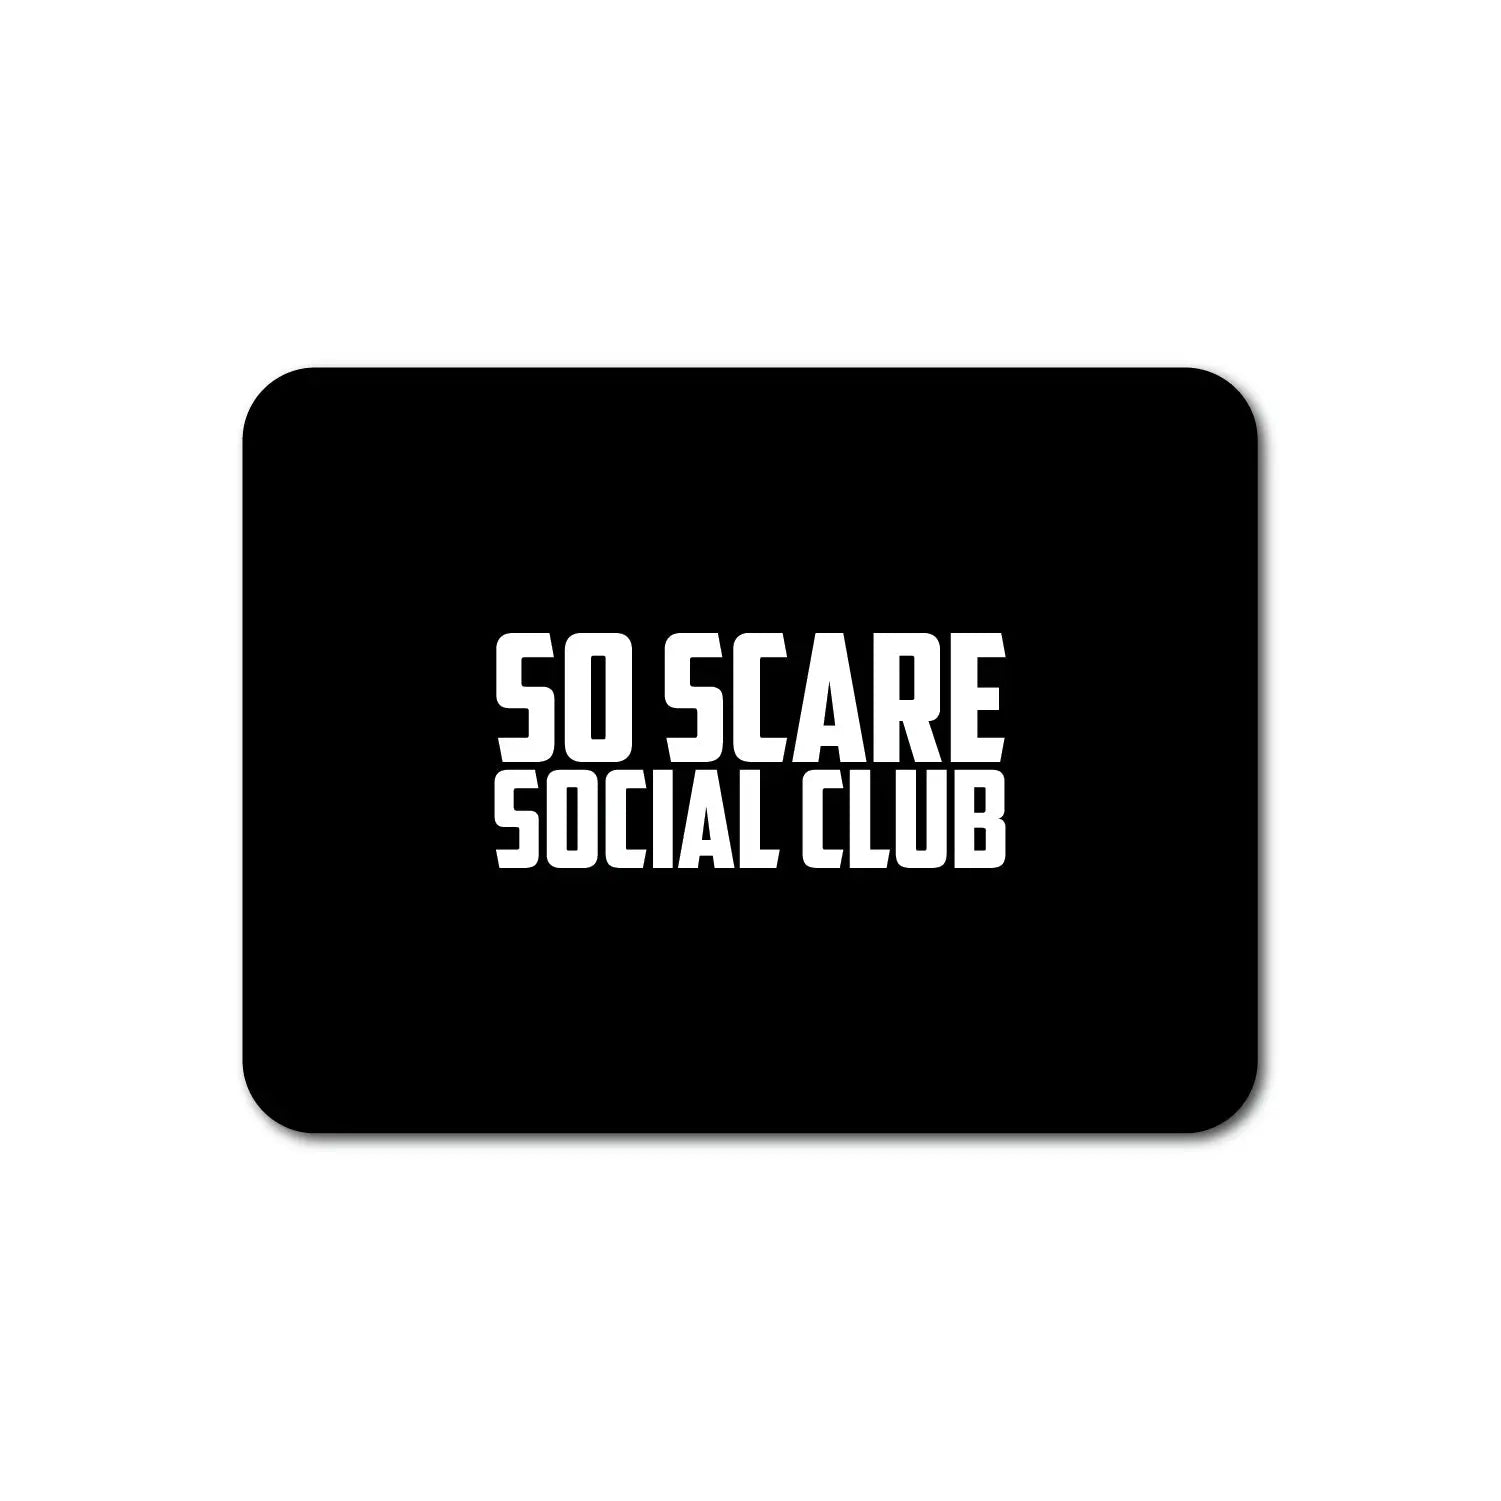 MOUSE PAD SO SCARE SOCIAL CLUB